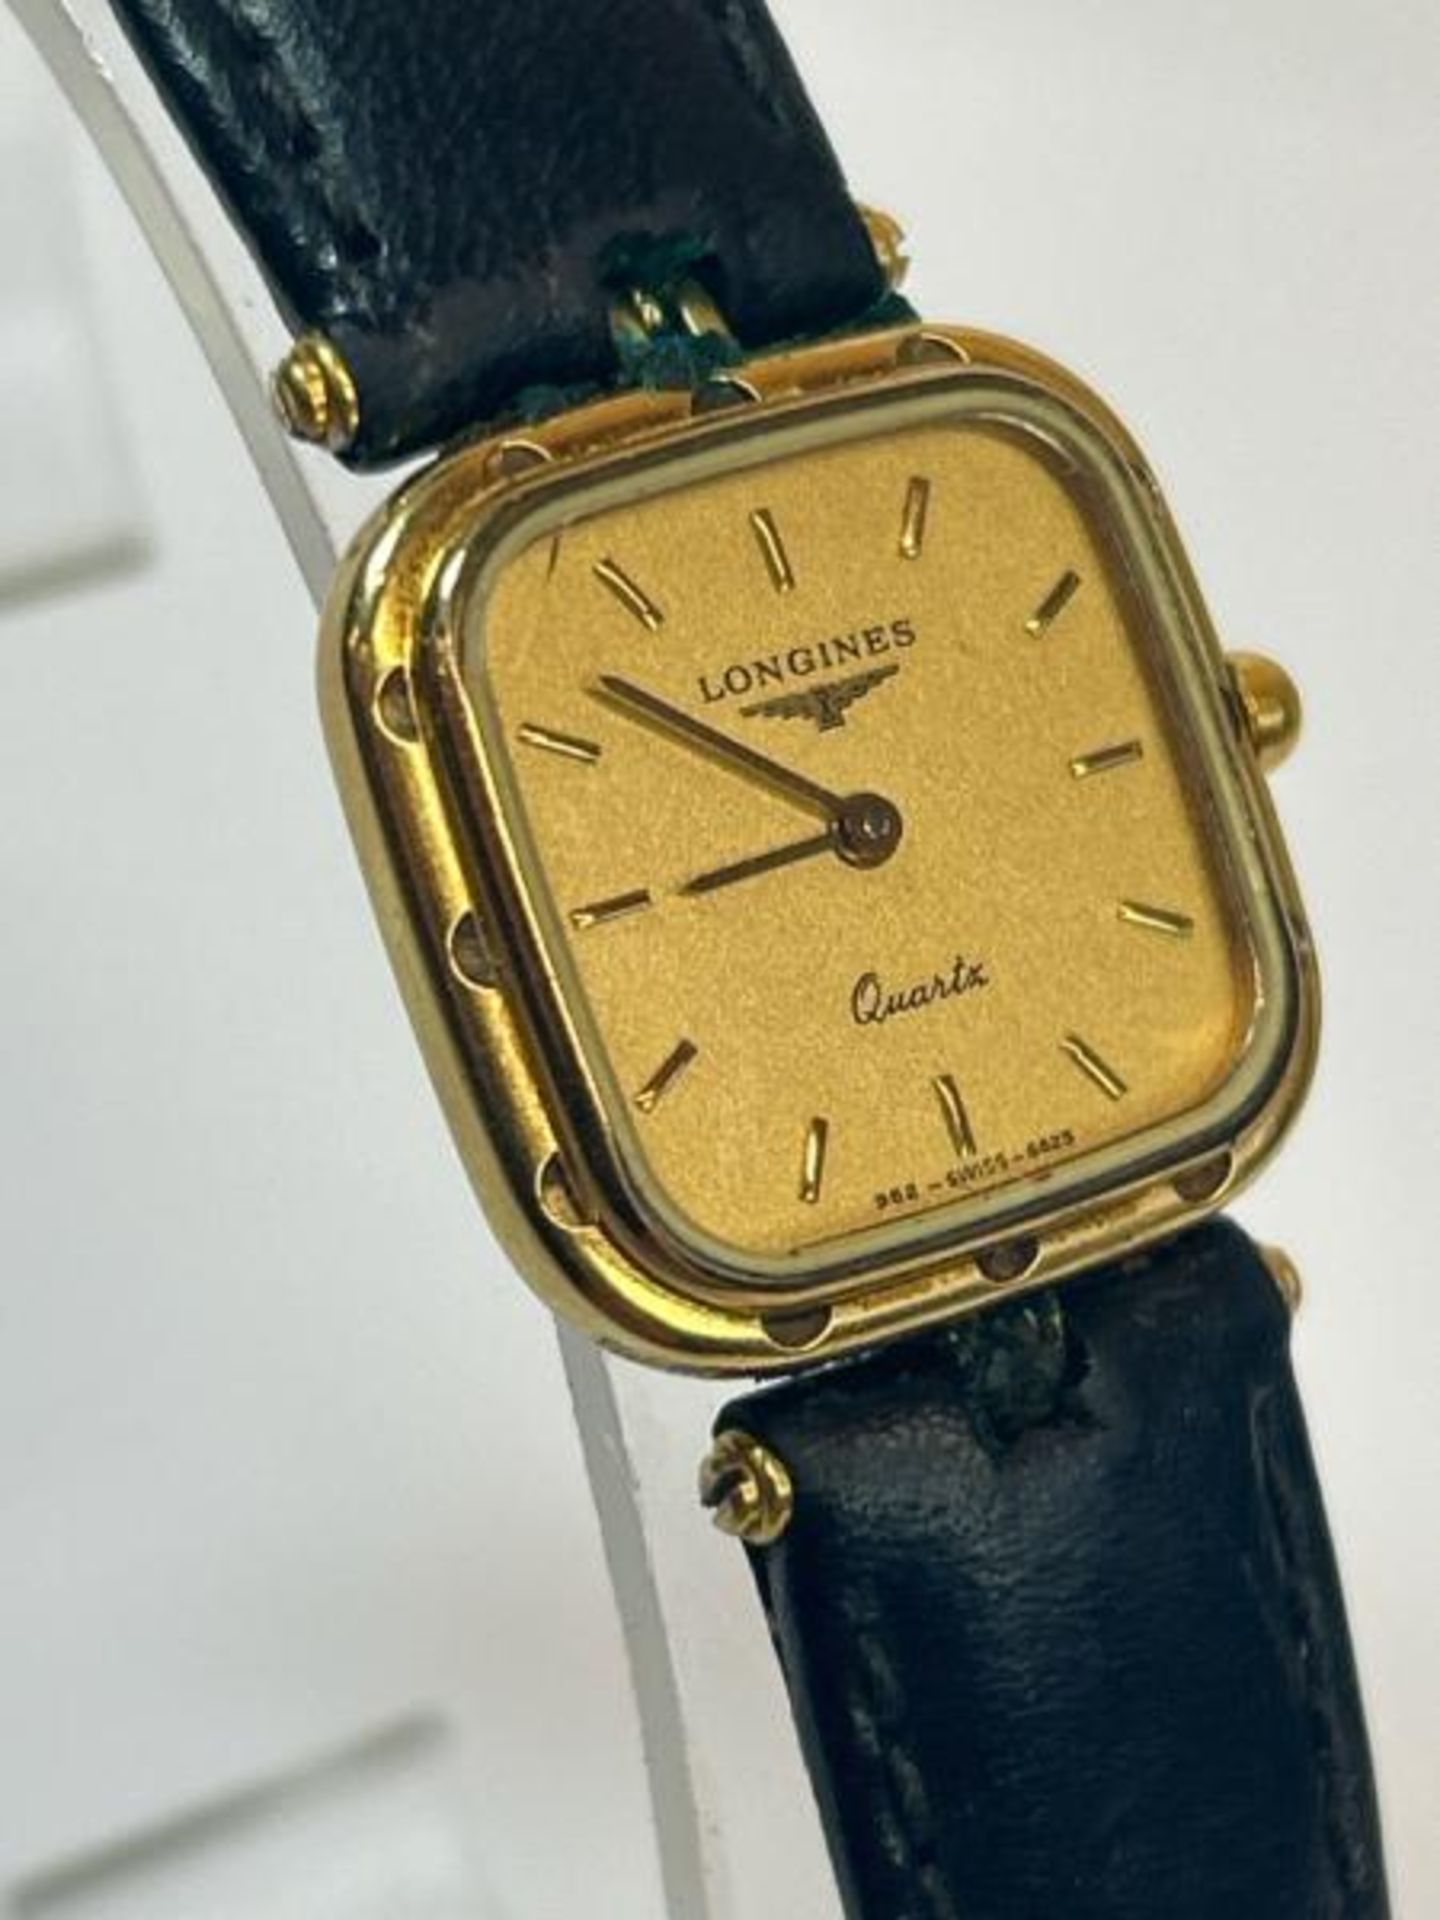 Vintage Longines gold plated wristwatch no.21712443 with quartz movement on black leather strap / SF - Image 3 of 5